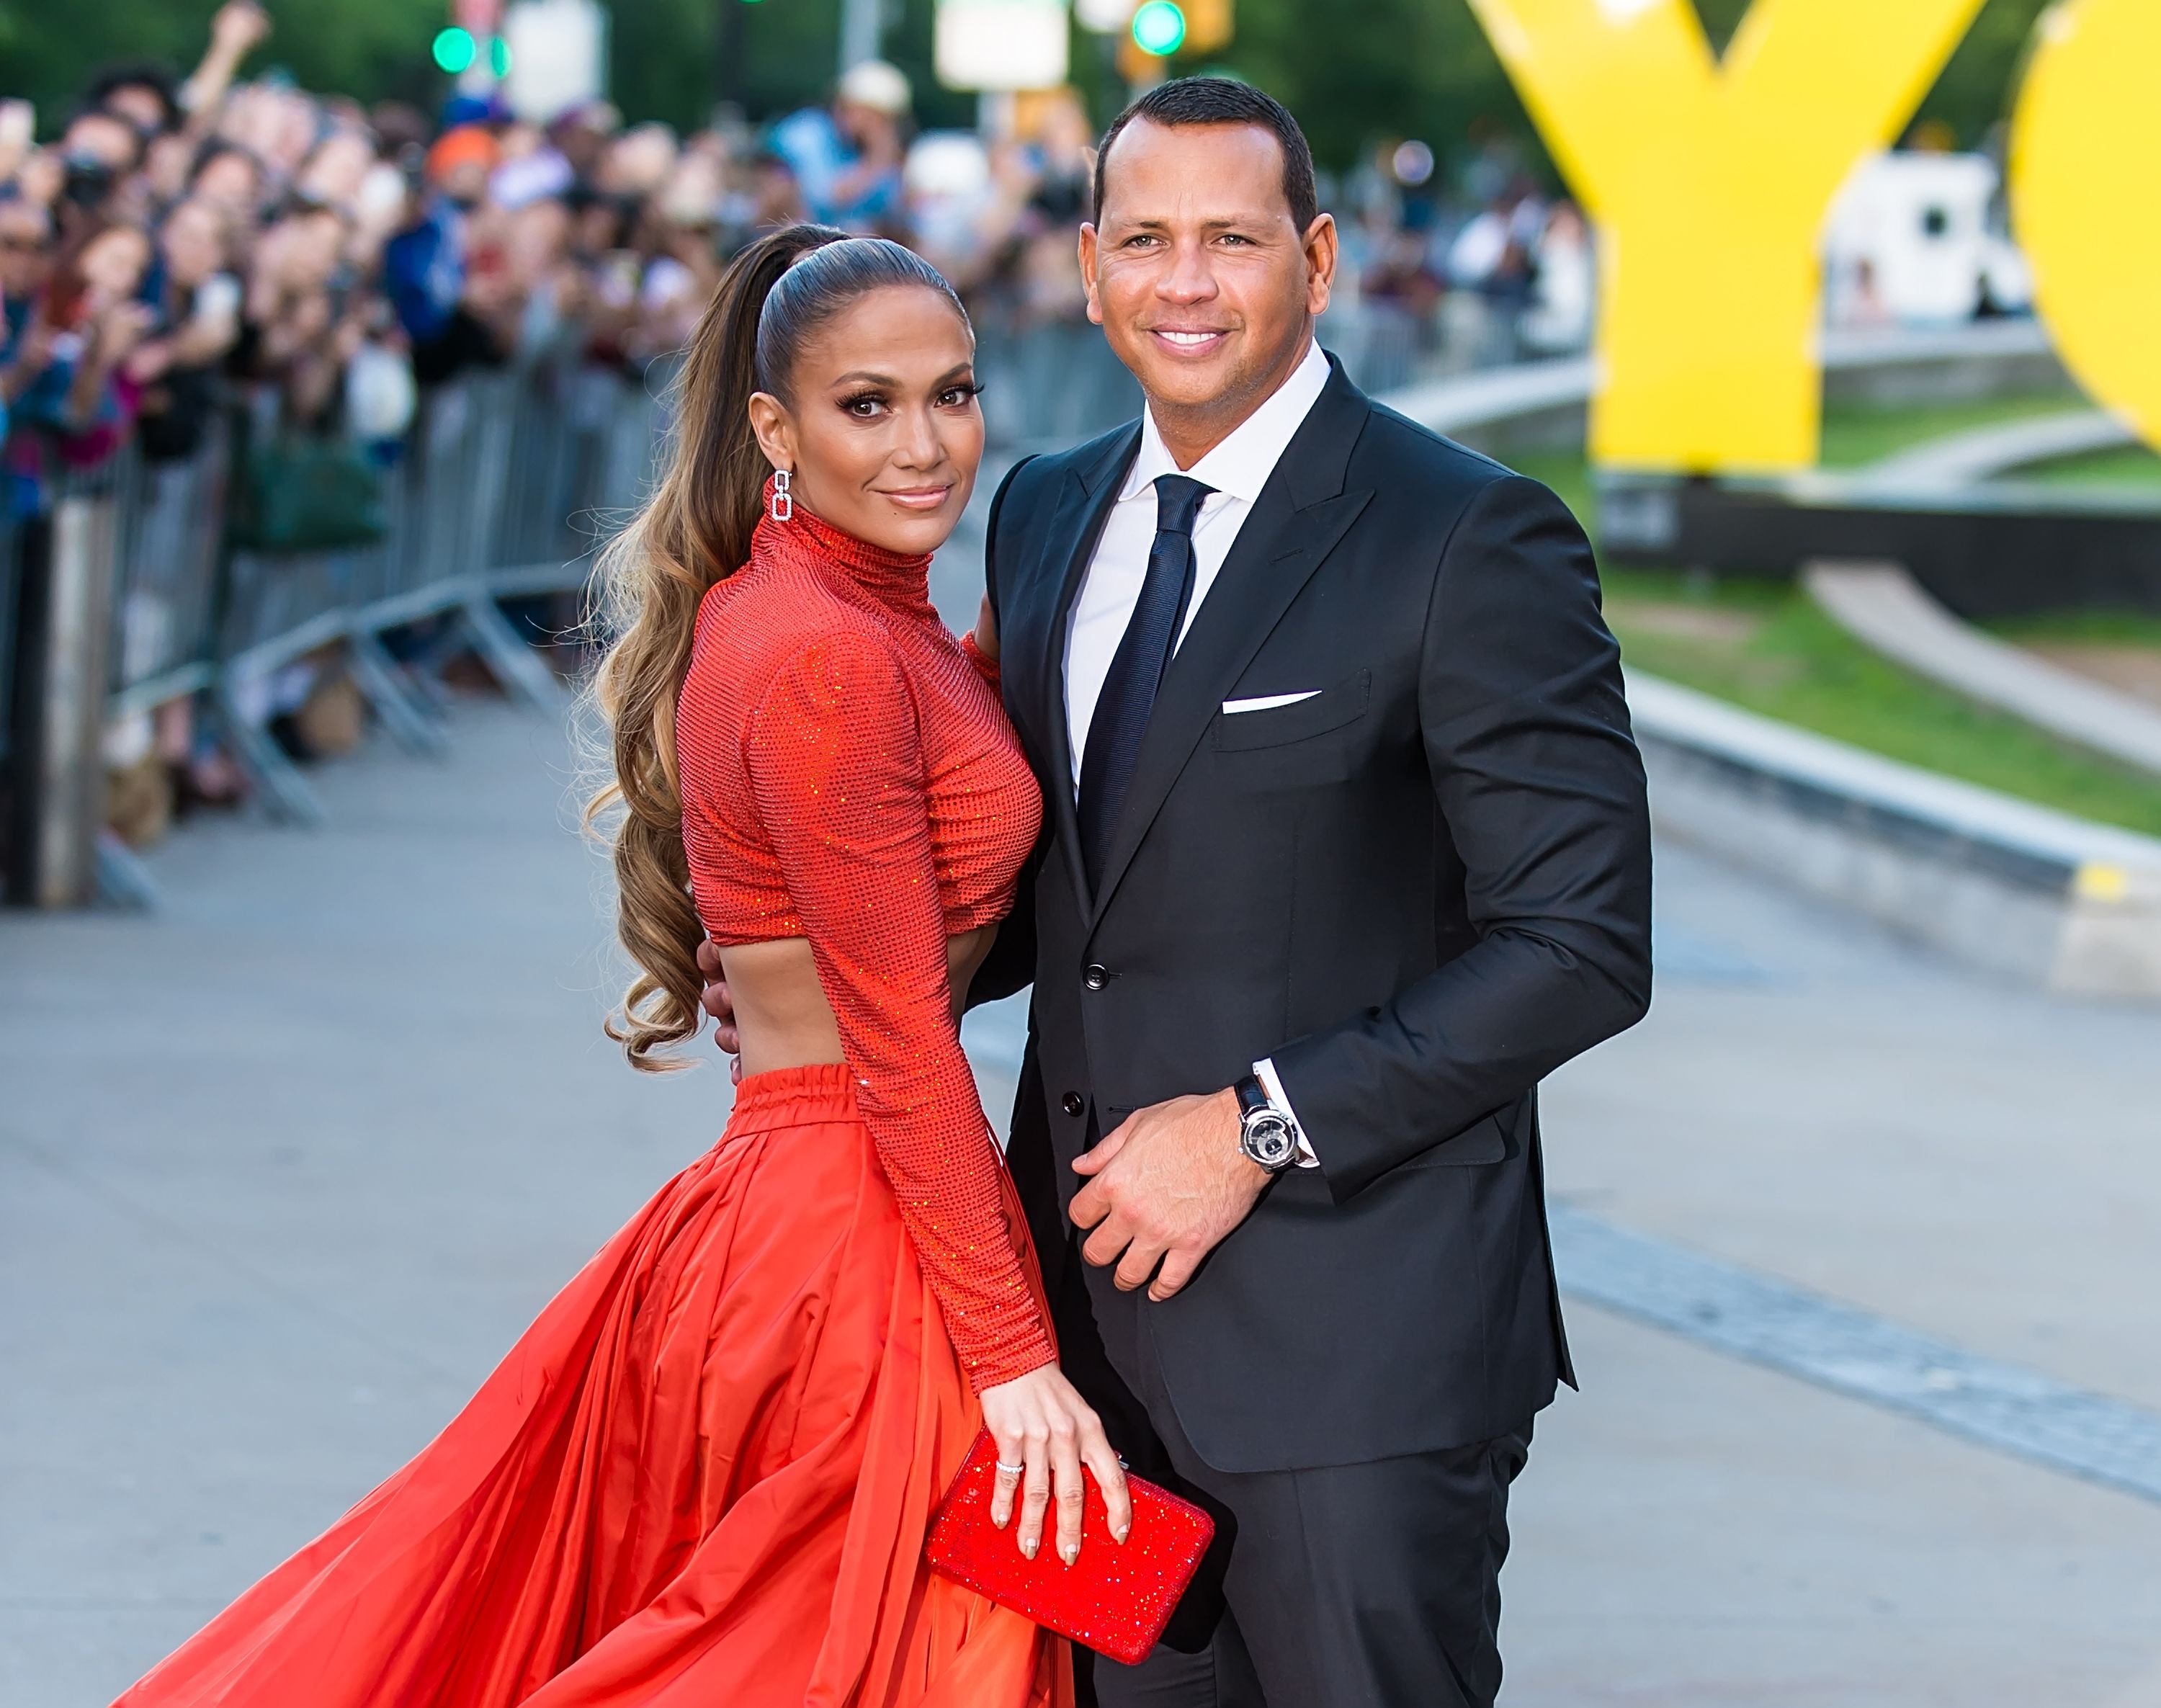 Jennifer Lopez and Alex Rodriguez  at the 2019 CFDA Fashion Awards on June 3, 2019 | Photo: Getty Images